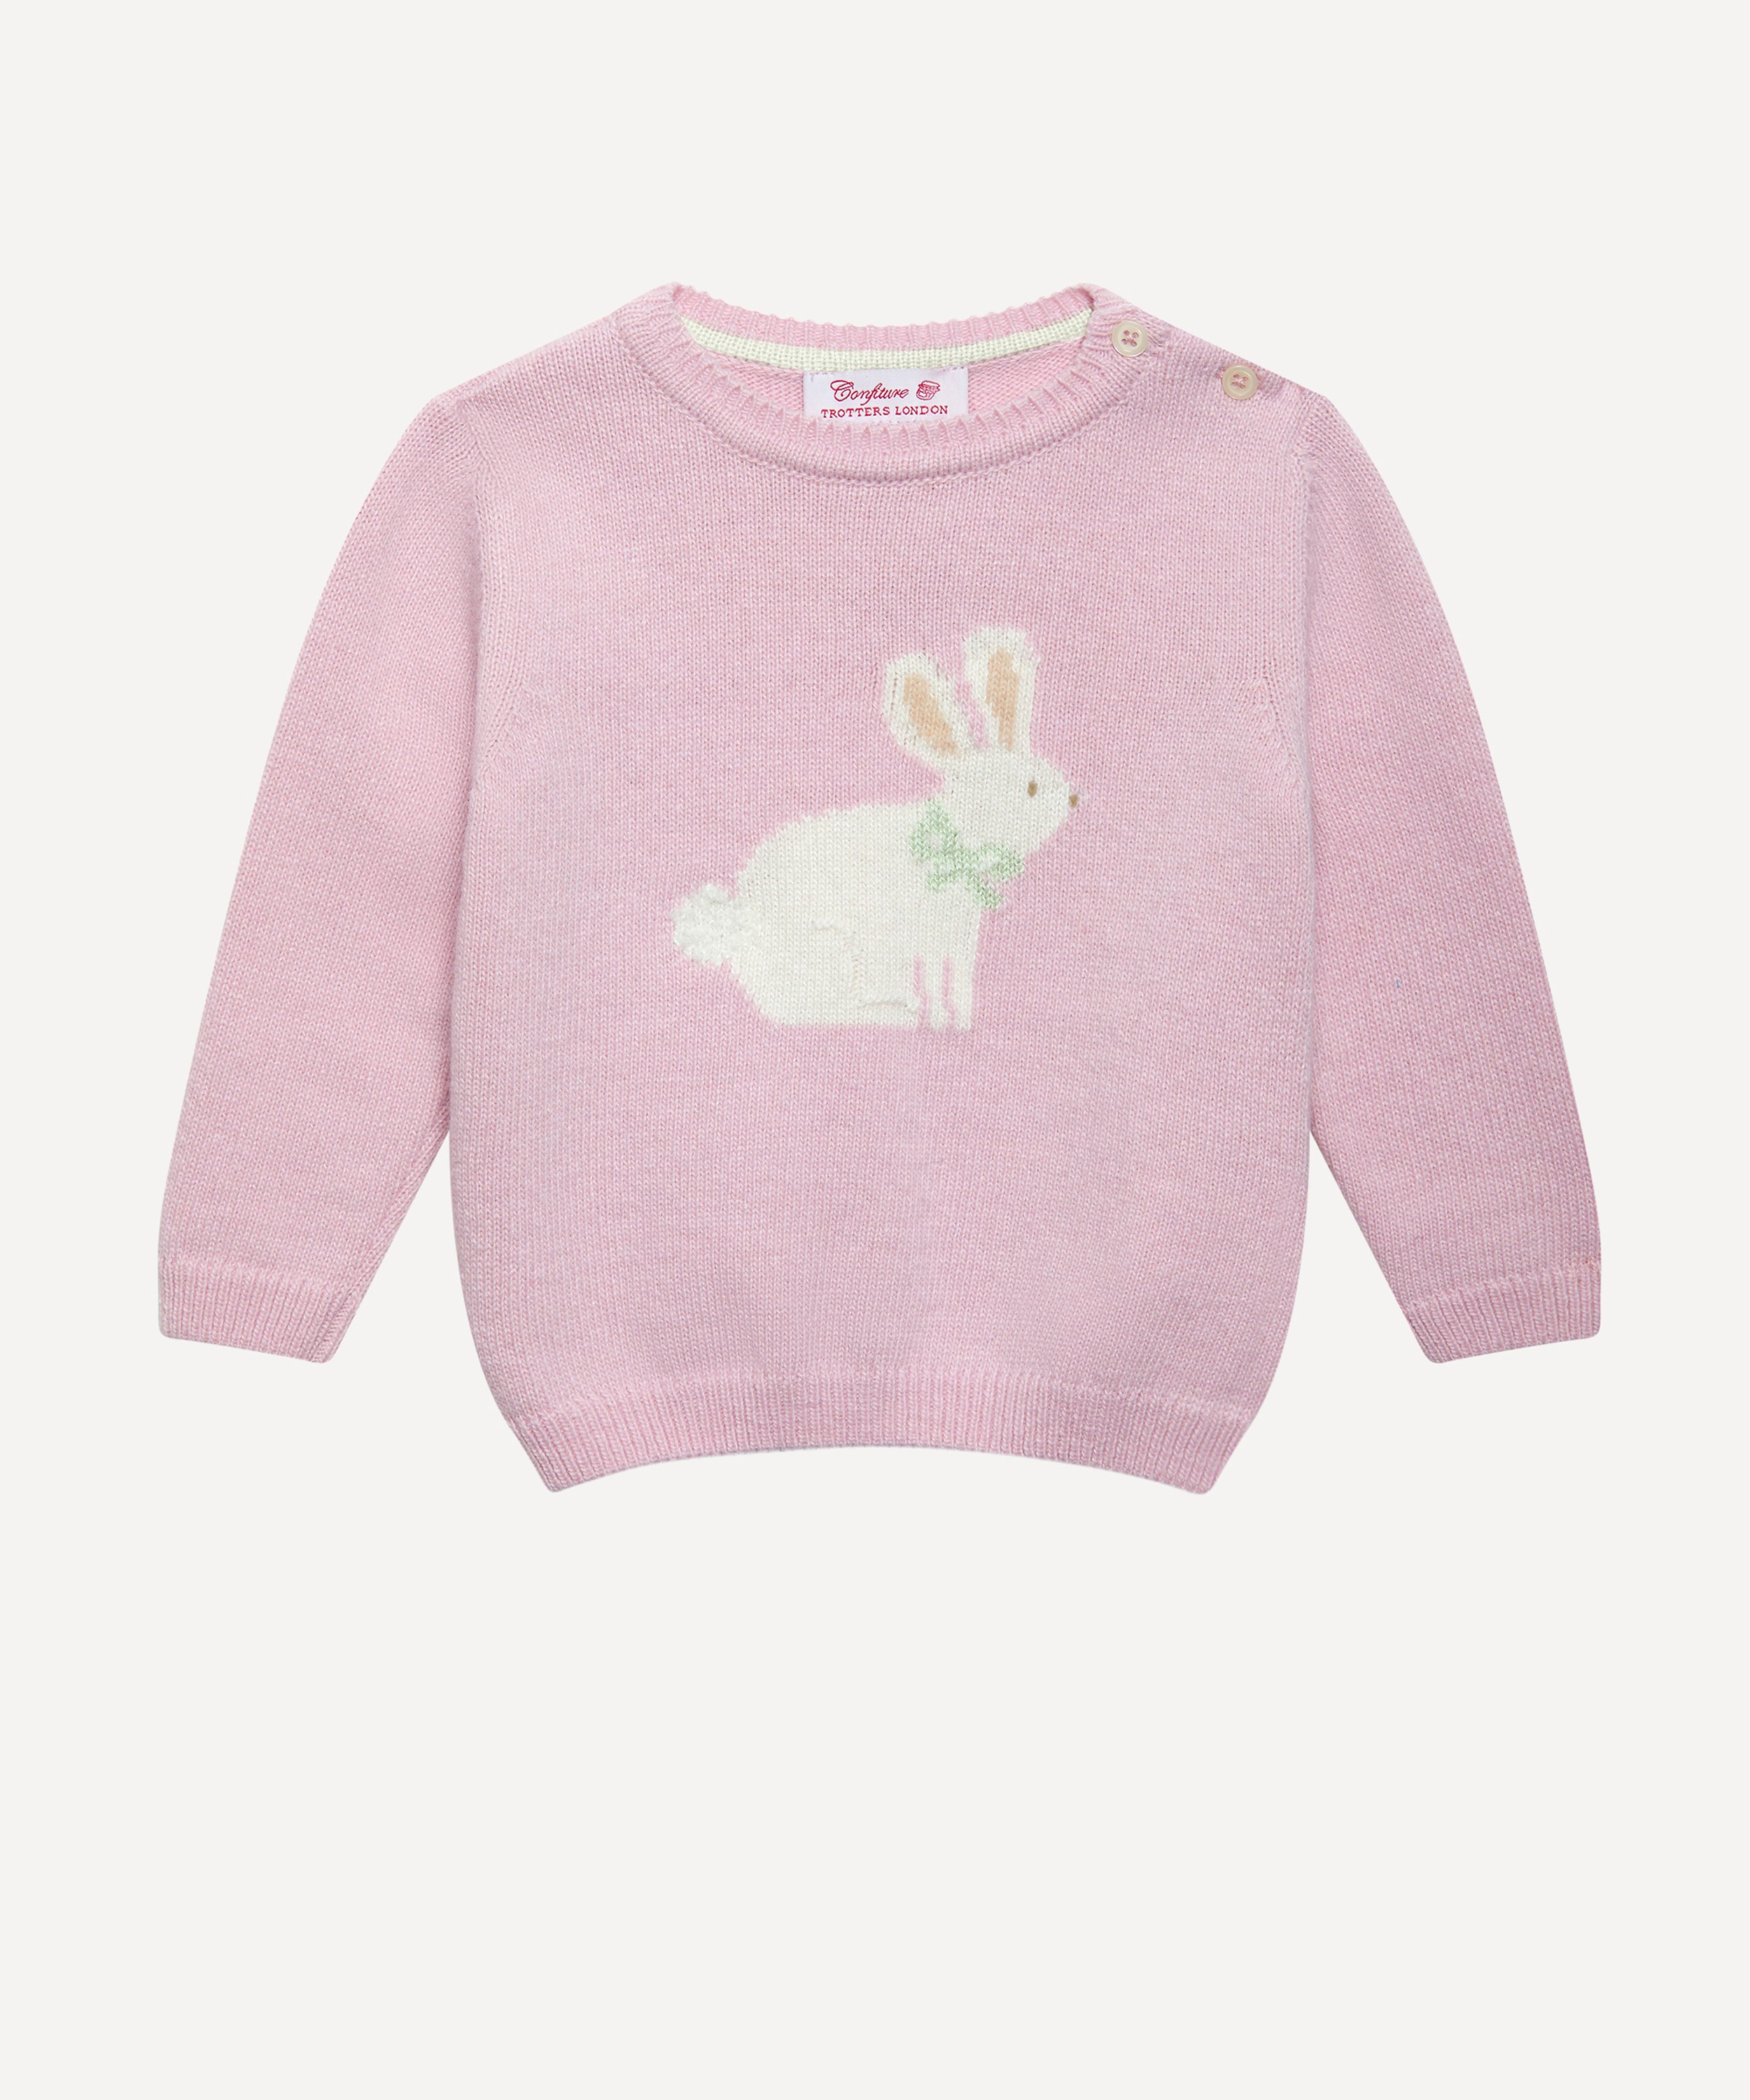 Trotters - Betty Bunny Jumper 3-24 Months